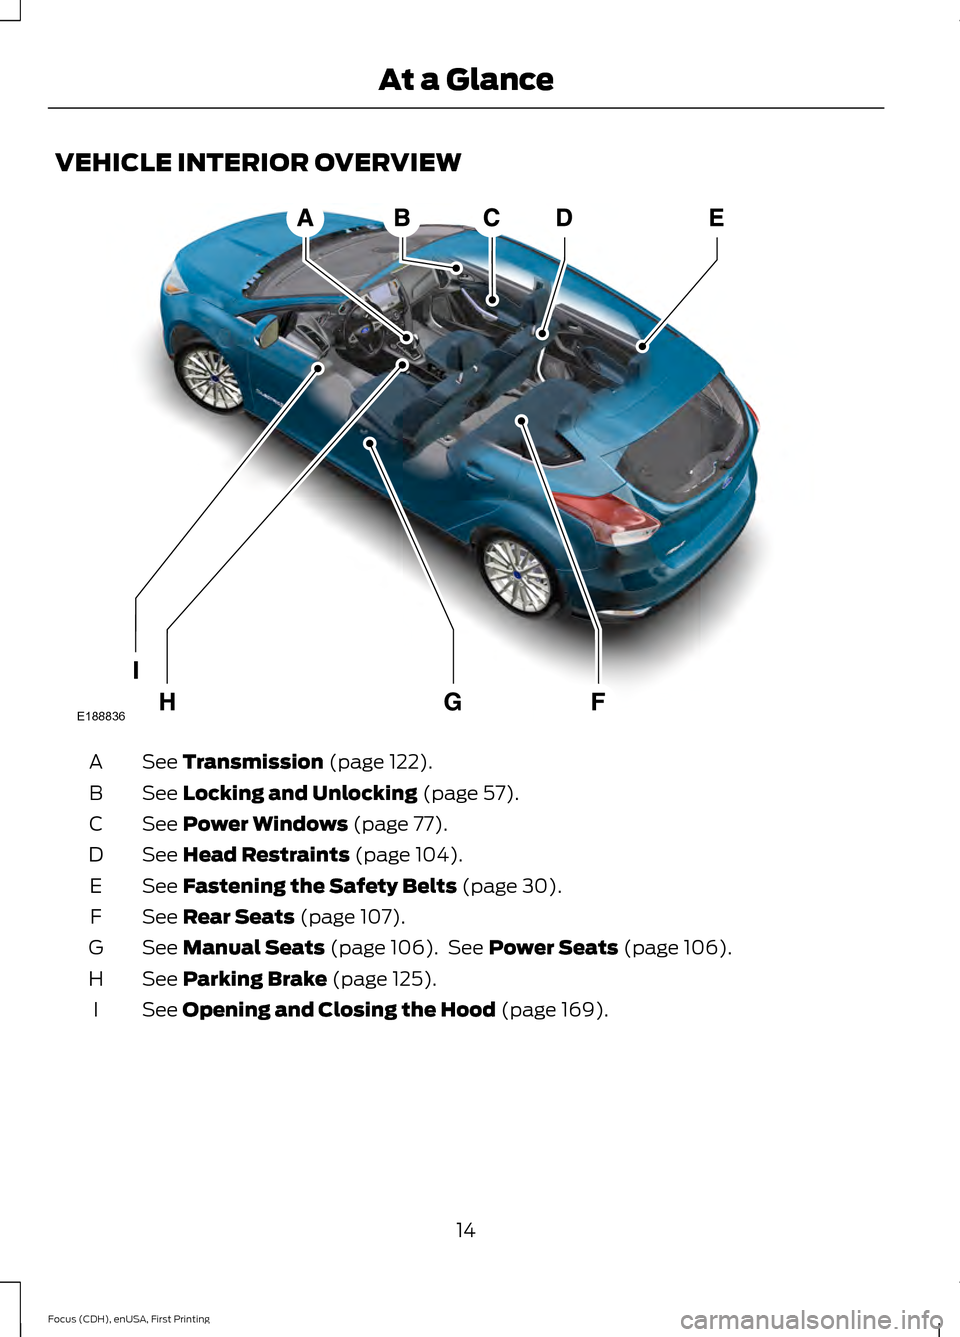 FORD FOCUS ELECTRIC 2015 3.G User Guide VEHICLE INTERIOR OVERVIEW
See Transmission (page 122).
A
See 
Locking and Unlocking (page 57).
B
See 
Power Windows (page 77).
C
See 
Head Restraints (page 104).
D
See 
Fastening the Safety Belts (pag